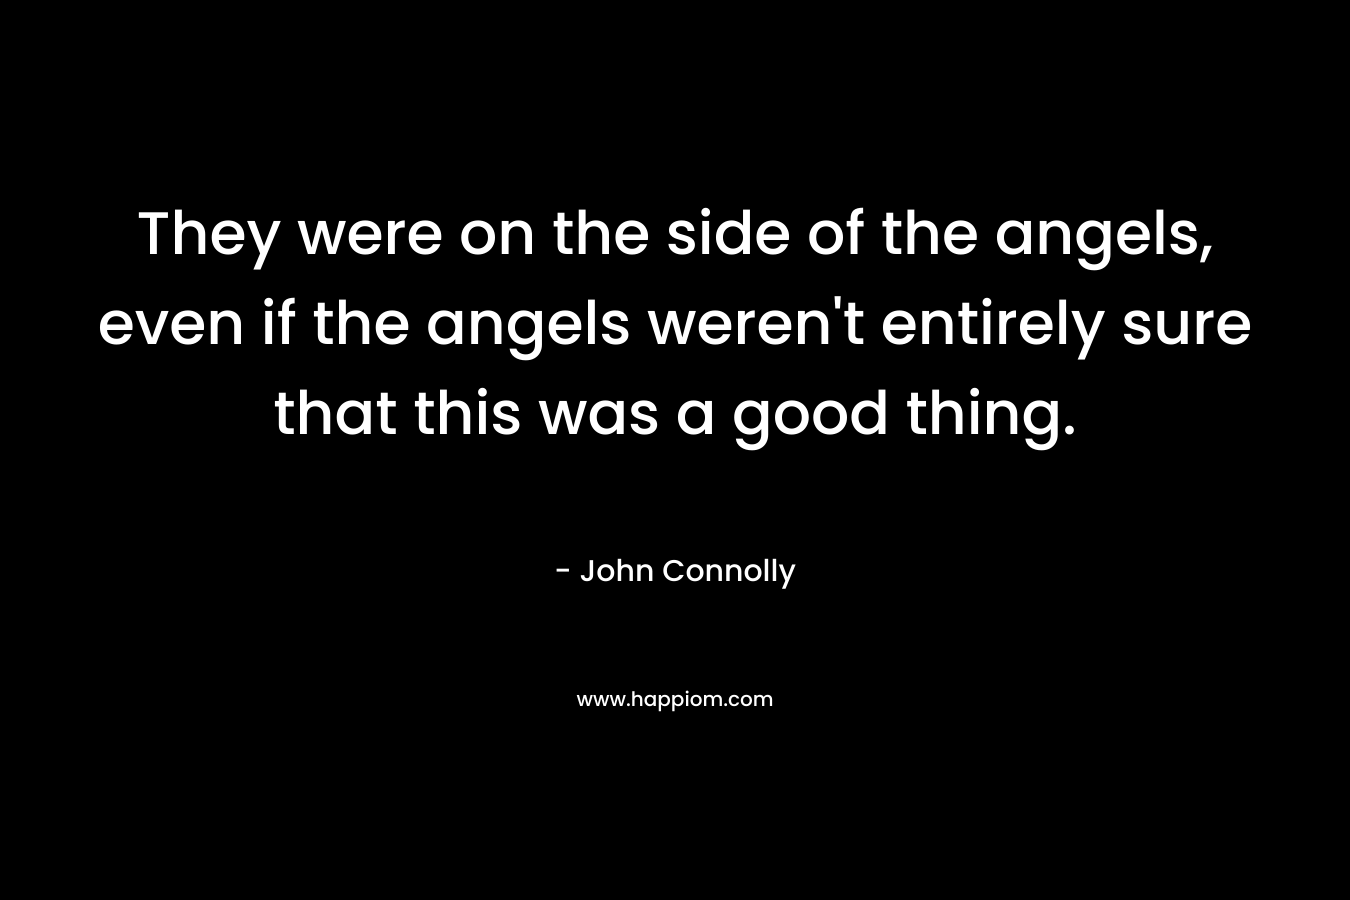 They were on the side of the angels, even if the angels weren't entirely sure that this was a good thing.